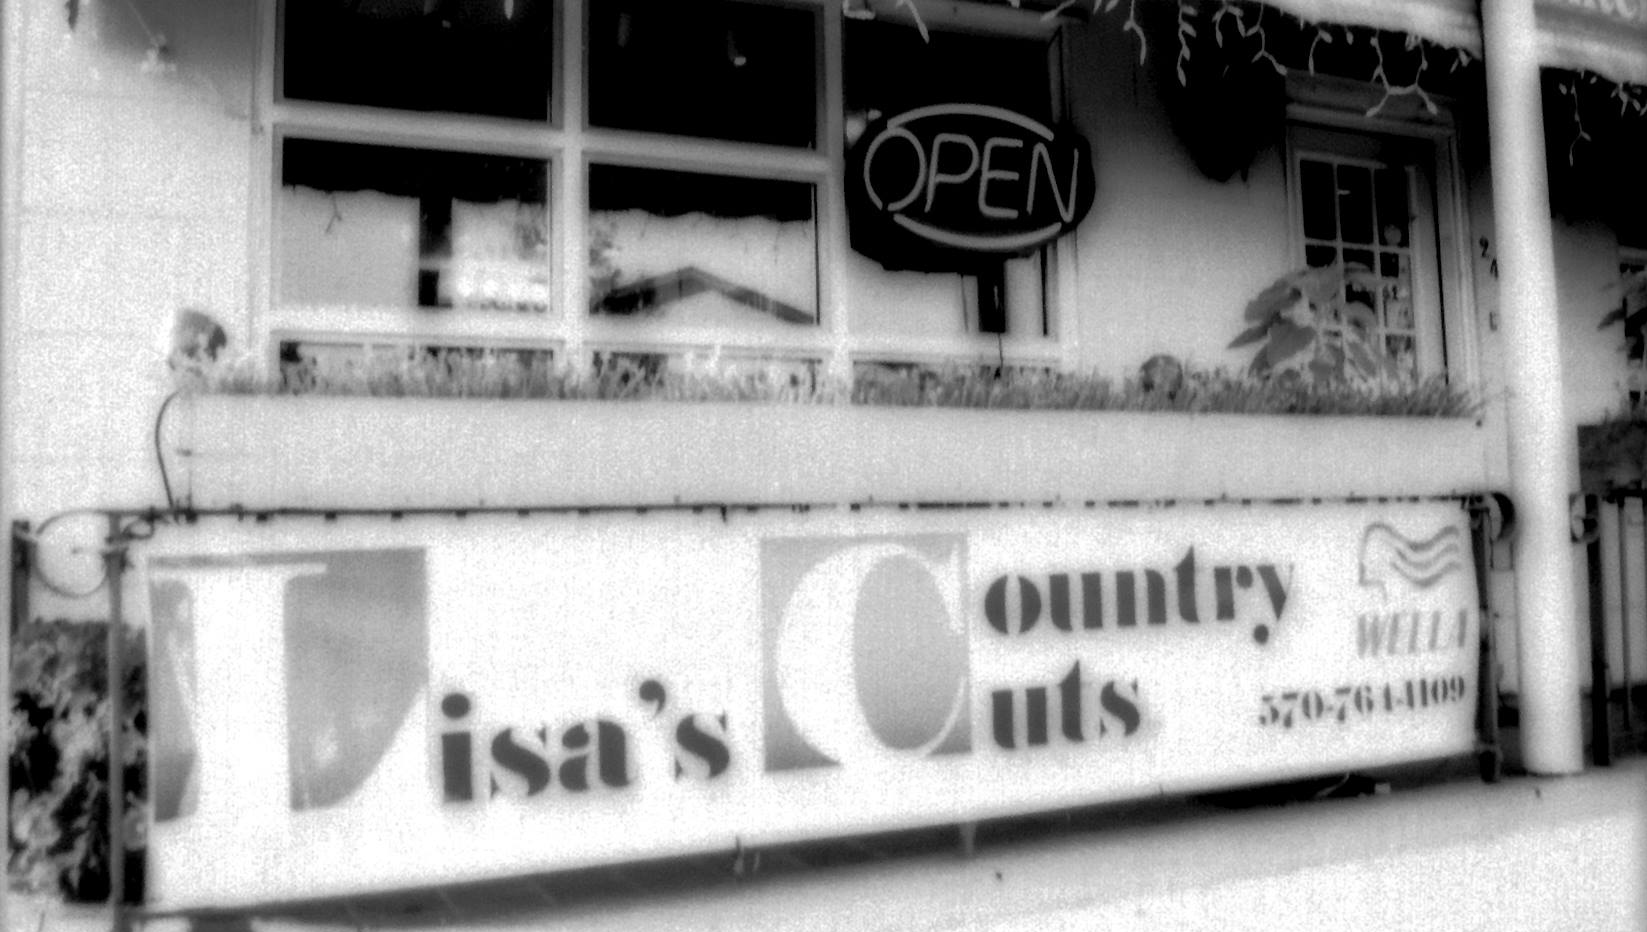 Shop front black and white